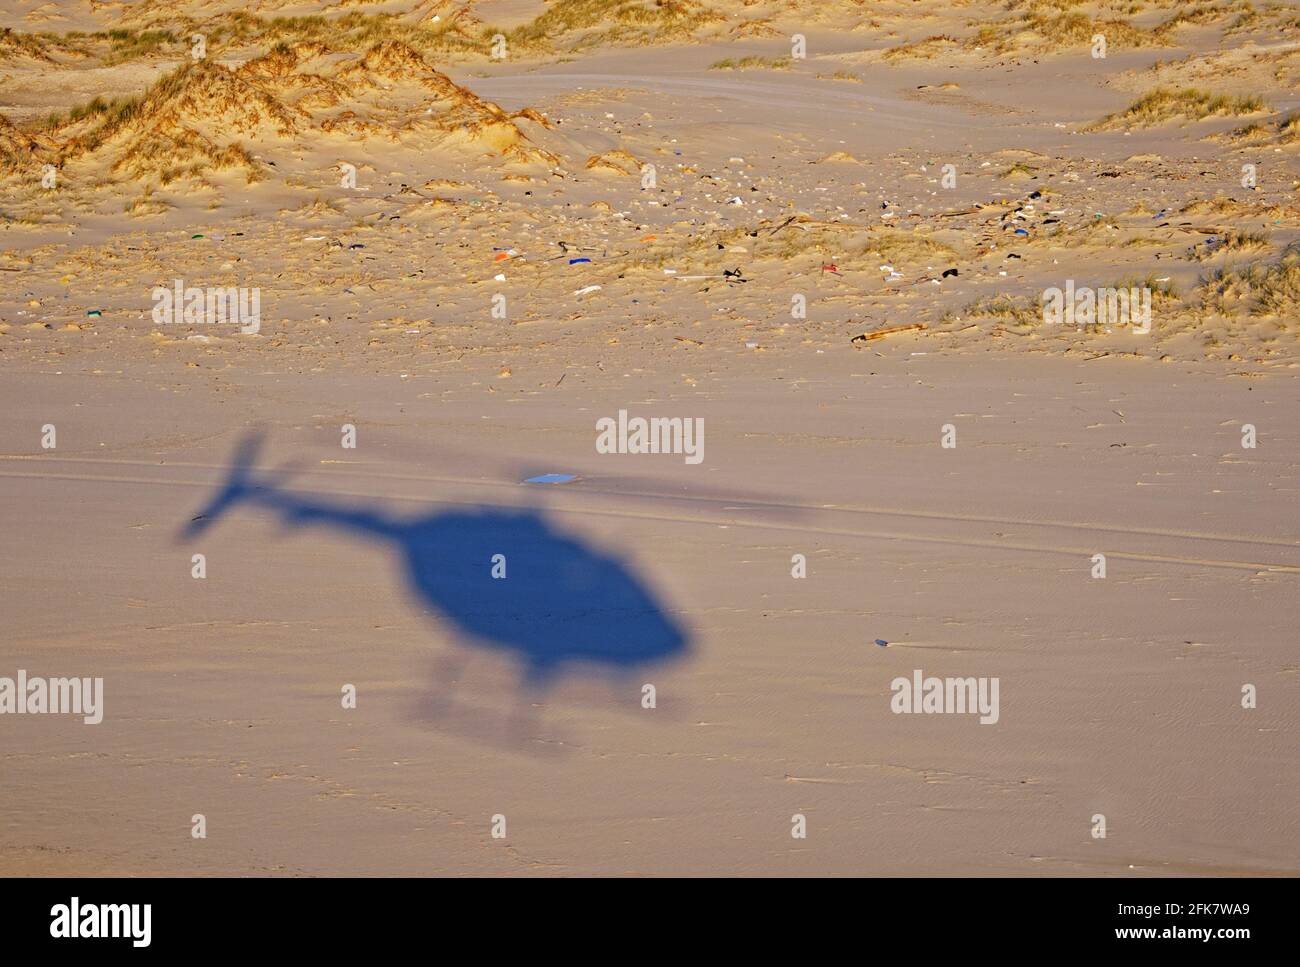 Shadow of an IAF helicopter silhouetted on the ground Stock Photo